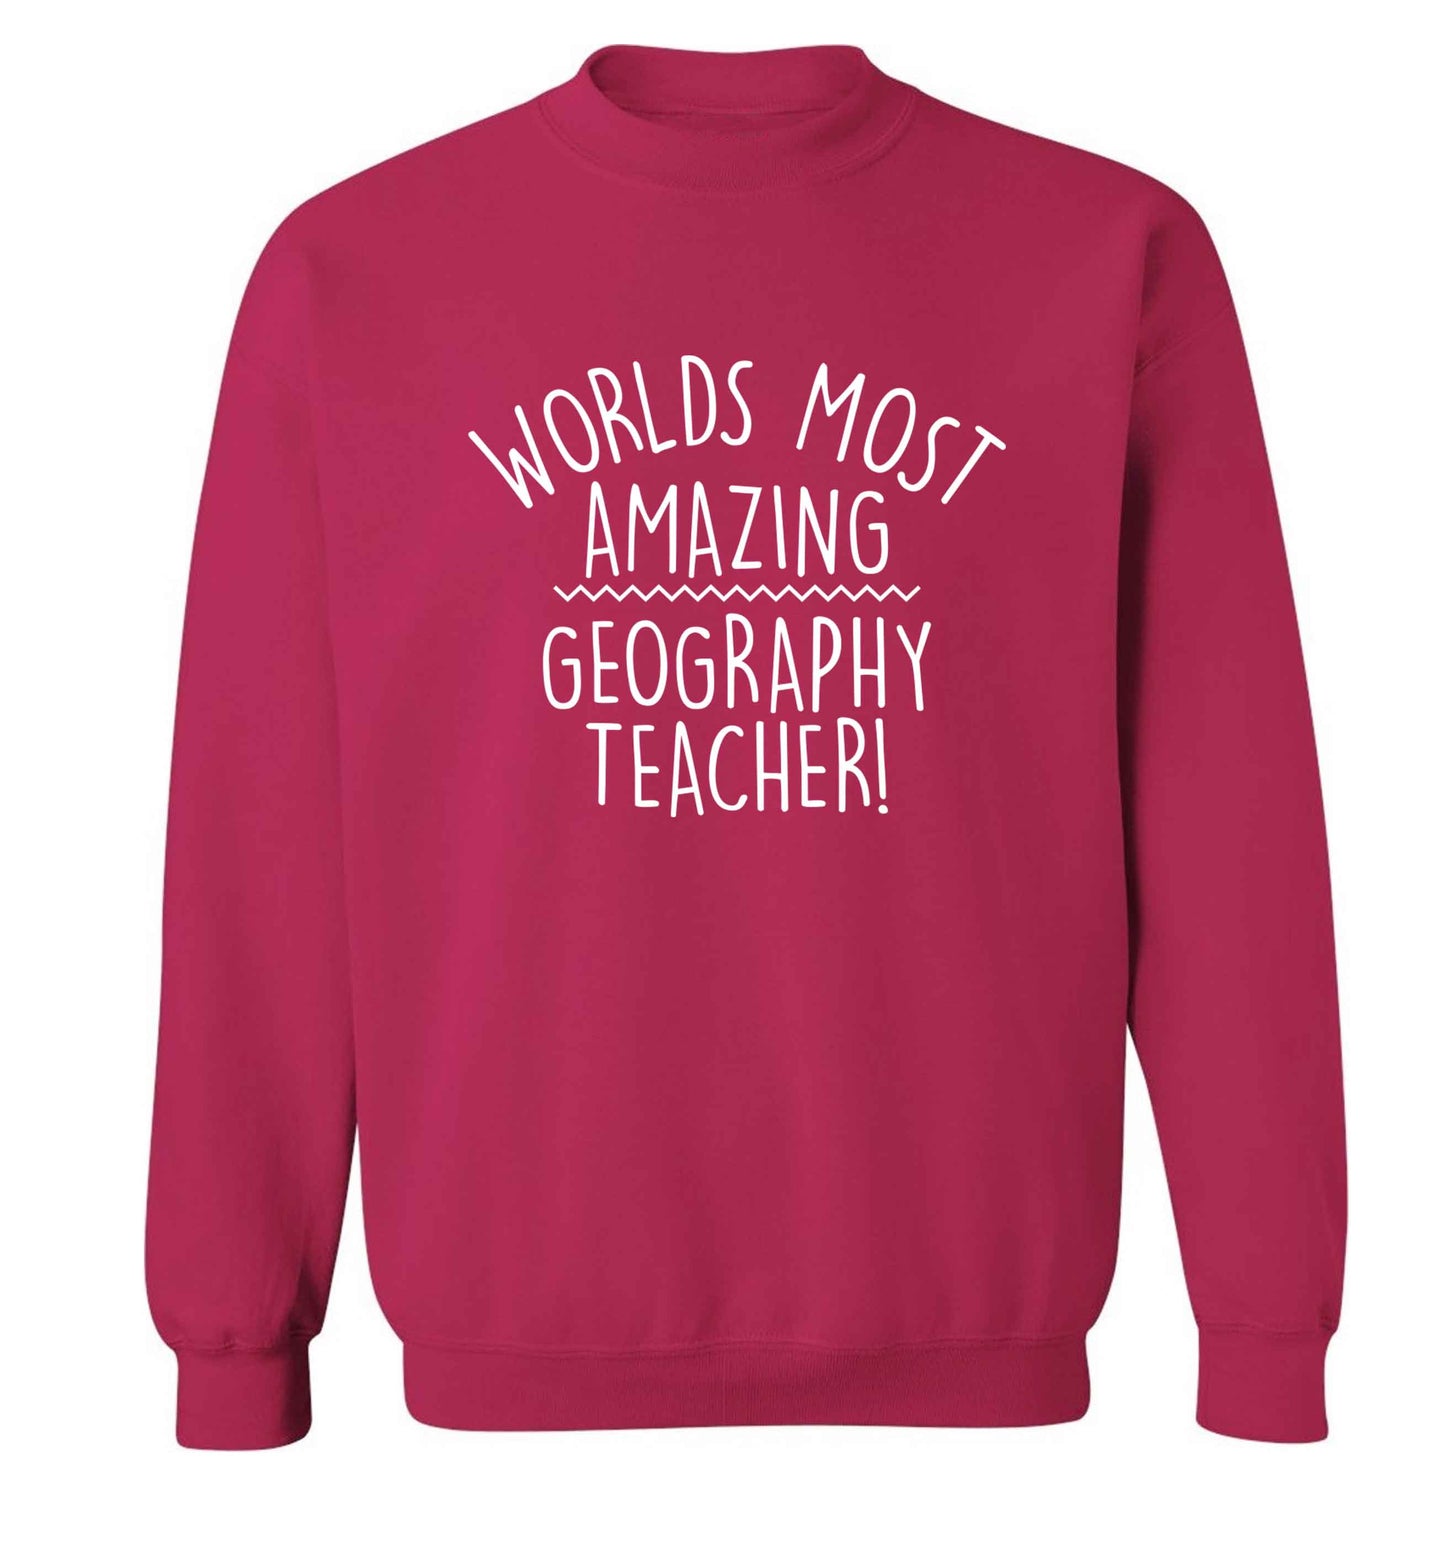 Worlds most amazing geography teacher adult's unisex pink sweater 2XL